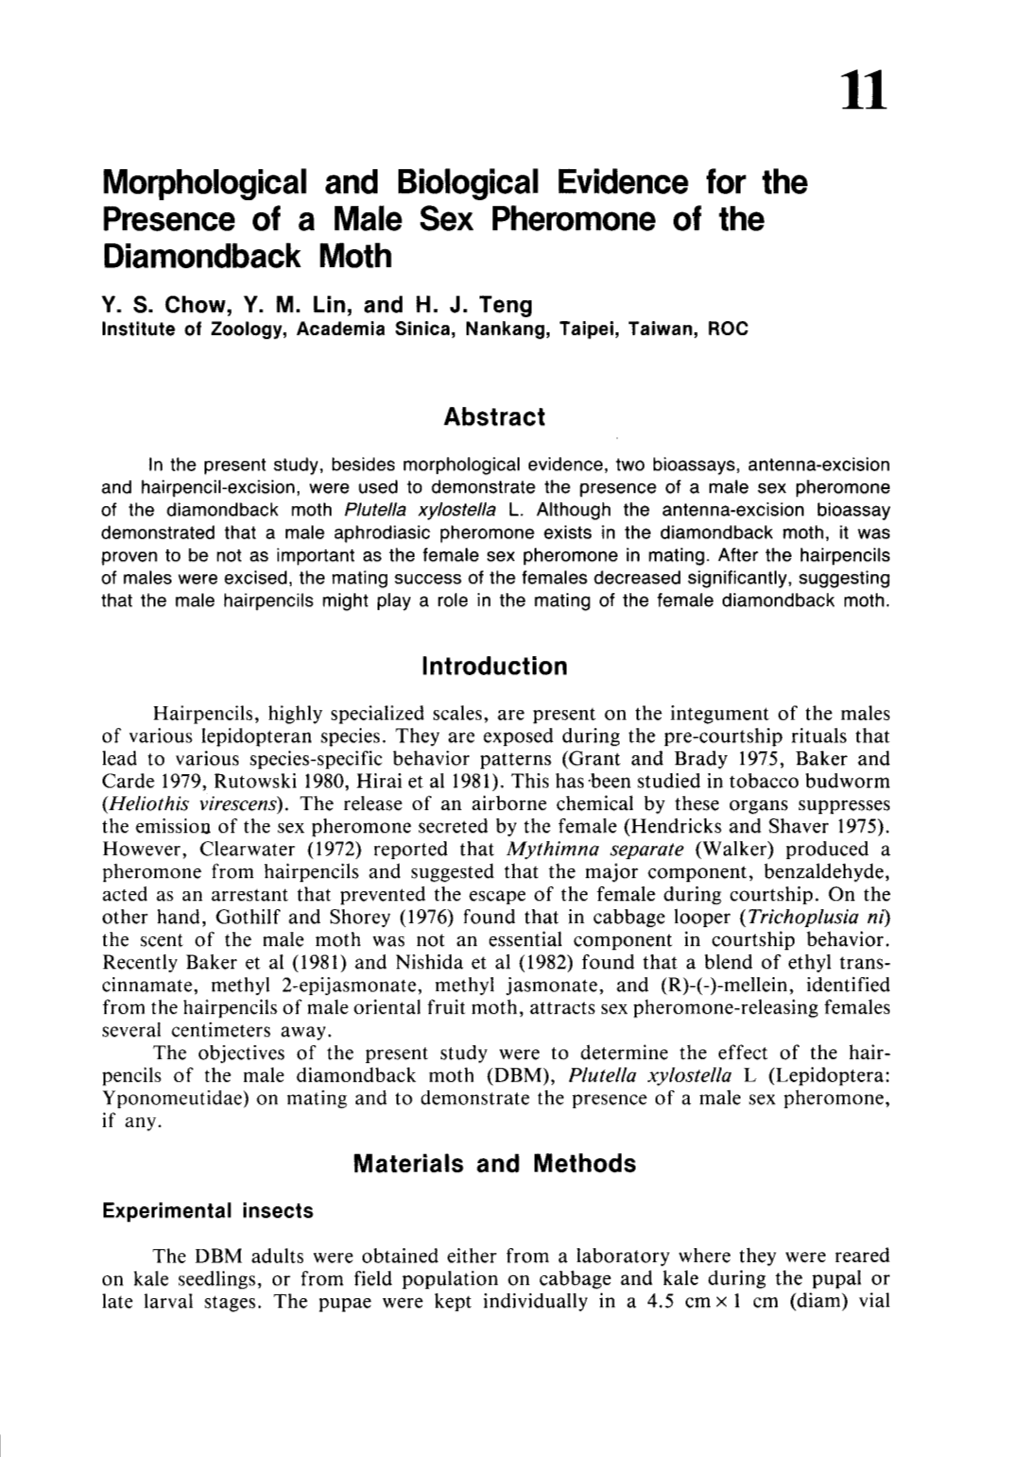 Morphological and Biological Evidence for the Presence of a Male Sex Pheromone of the Diamondback Moth Y